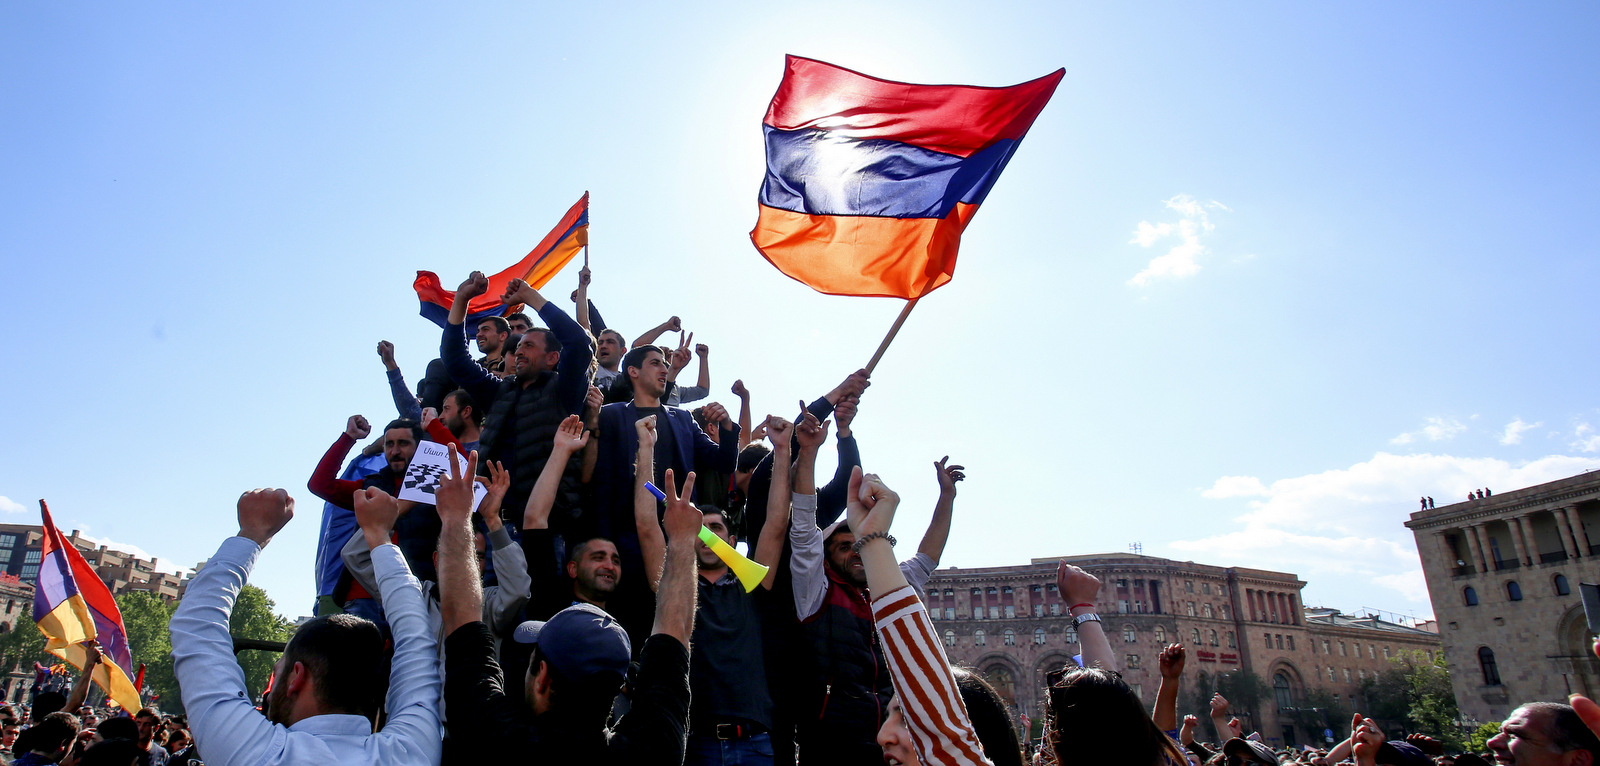 People celebrate Armenian Prime Minister's Serzh Sargsyan's resignation in Republic Square in Yerevan, Armenia, April 23, 2018. Sargsyan resigned unexpectedly on Monday, an apparent move to bring to an end massive anti-government protests. (Grigor Yepremyan/PAN/AP)